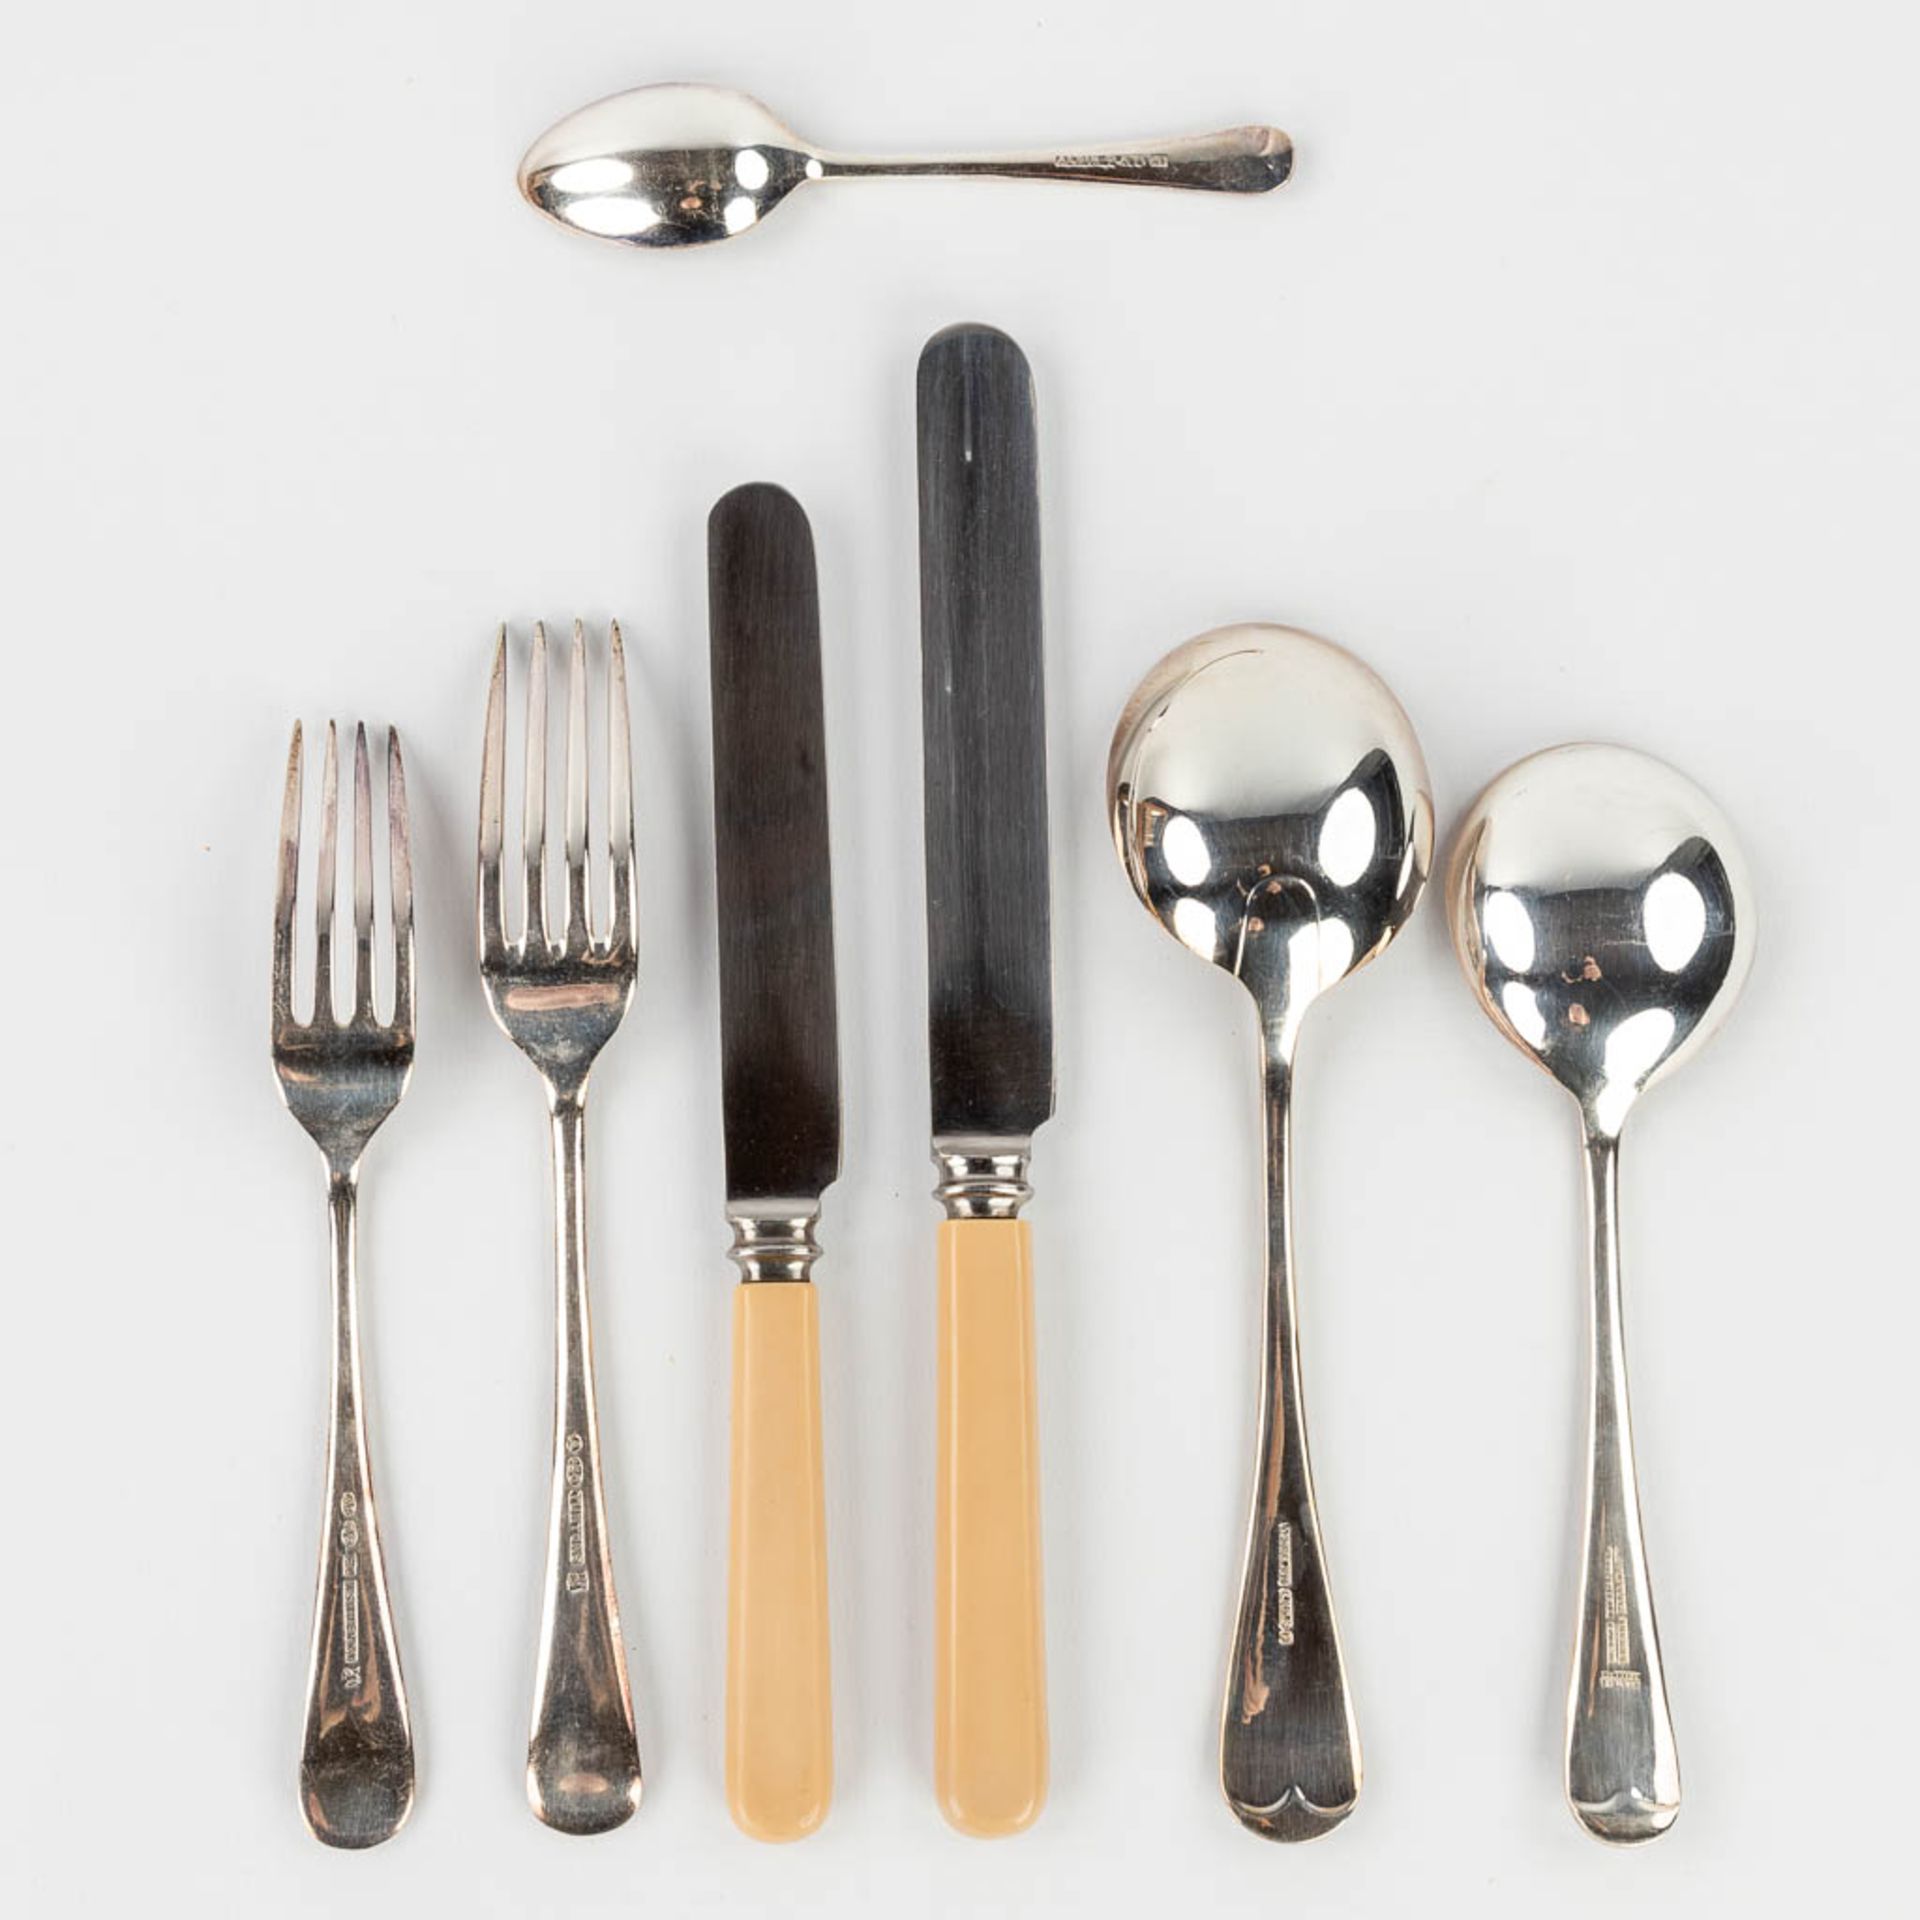 A vintage silver-plated cutlery in a wood chest. Made in the UK. (L:32 x W:47 x H:9 cm) - Image 6 of 17